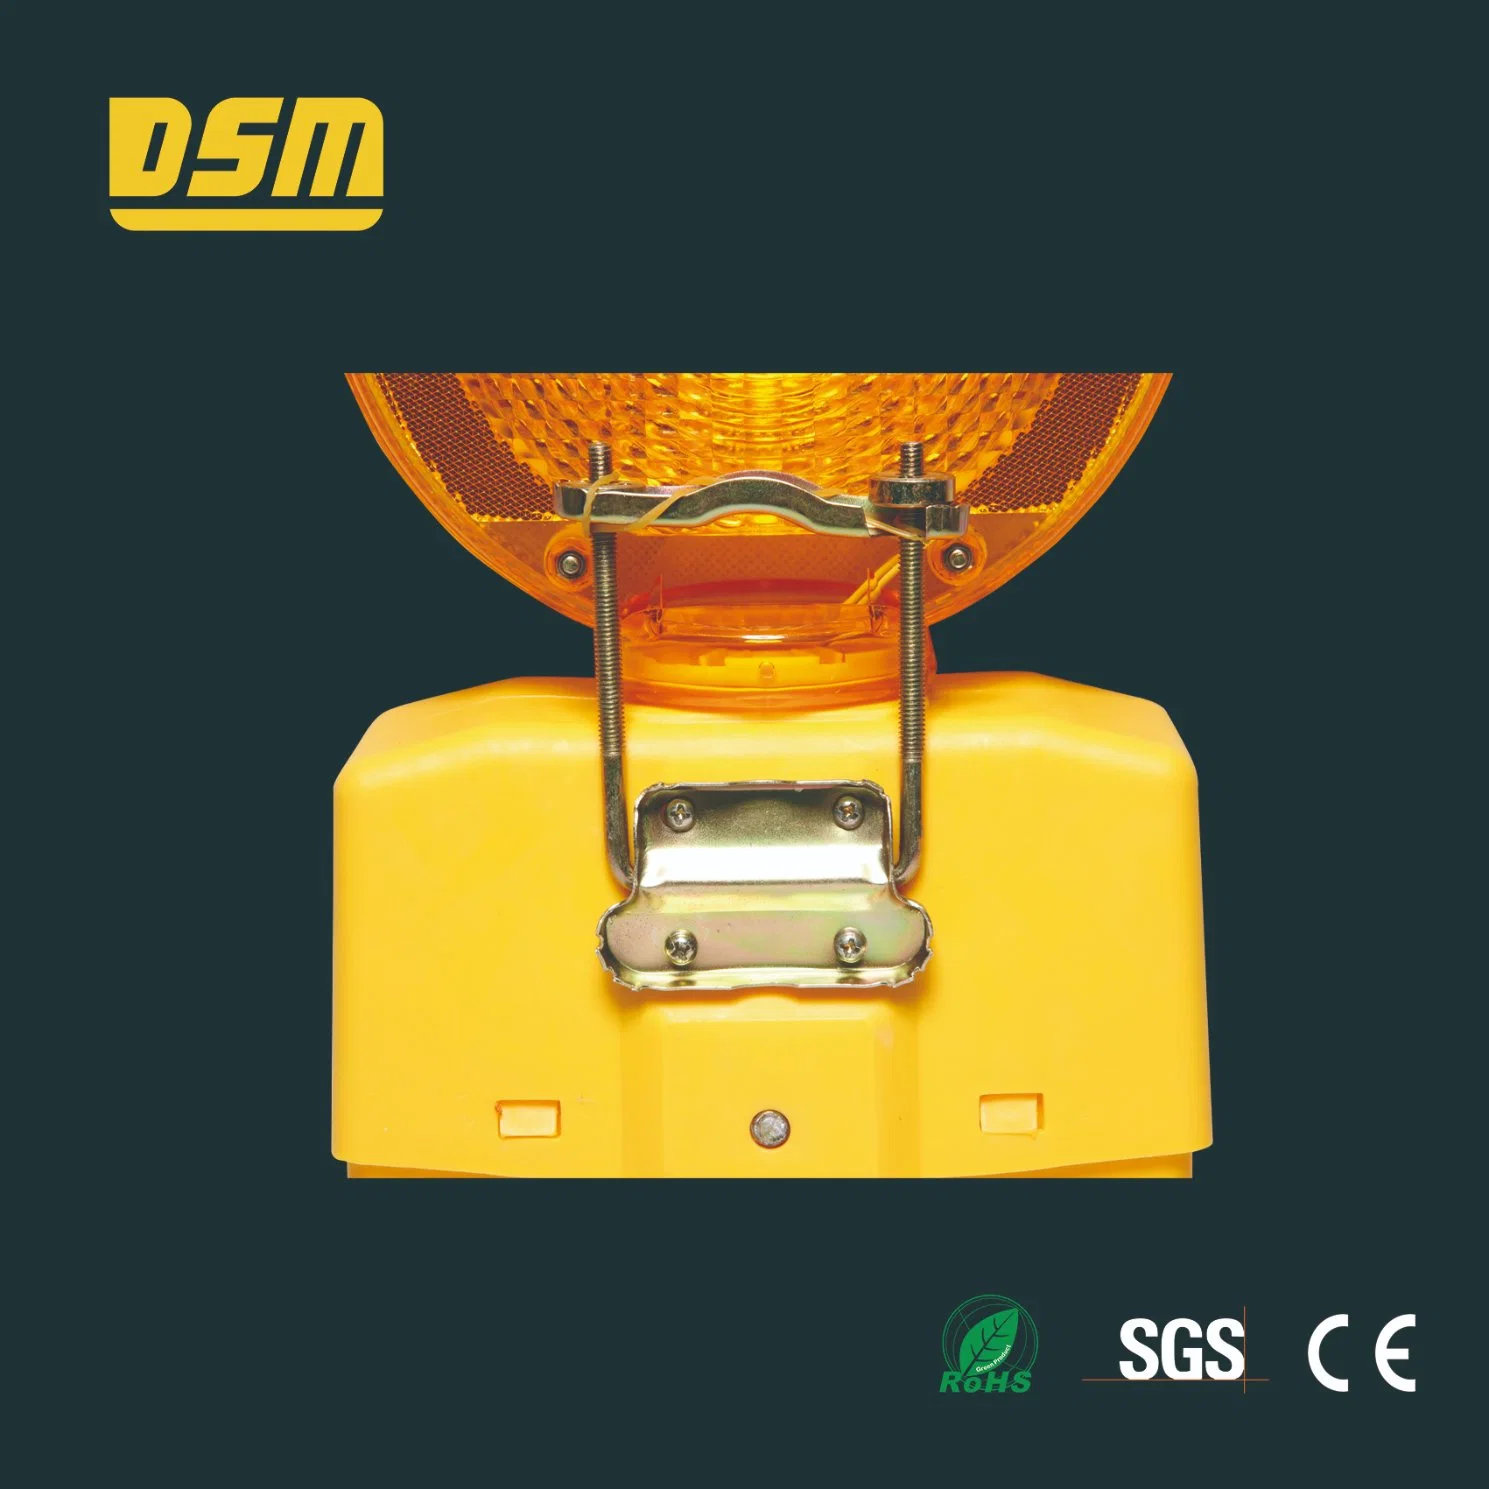 High quality/High cost performance RoHS Approved Southeast Asia Dsm Shockproof Anti-Rain Traffic Warning Lamp Control Barricade Light